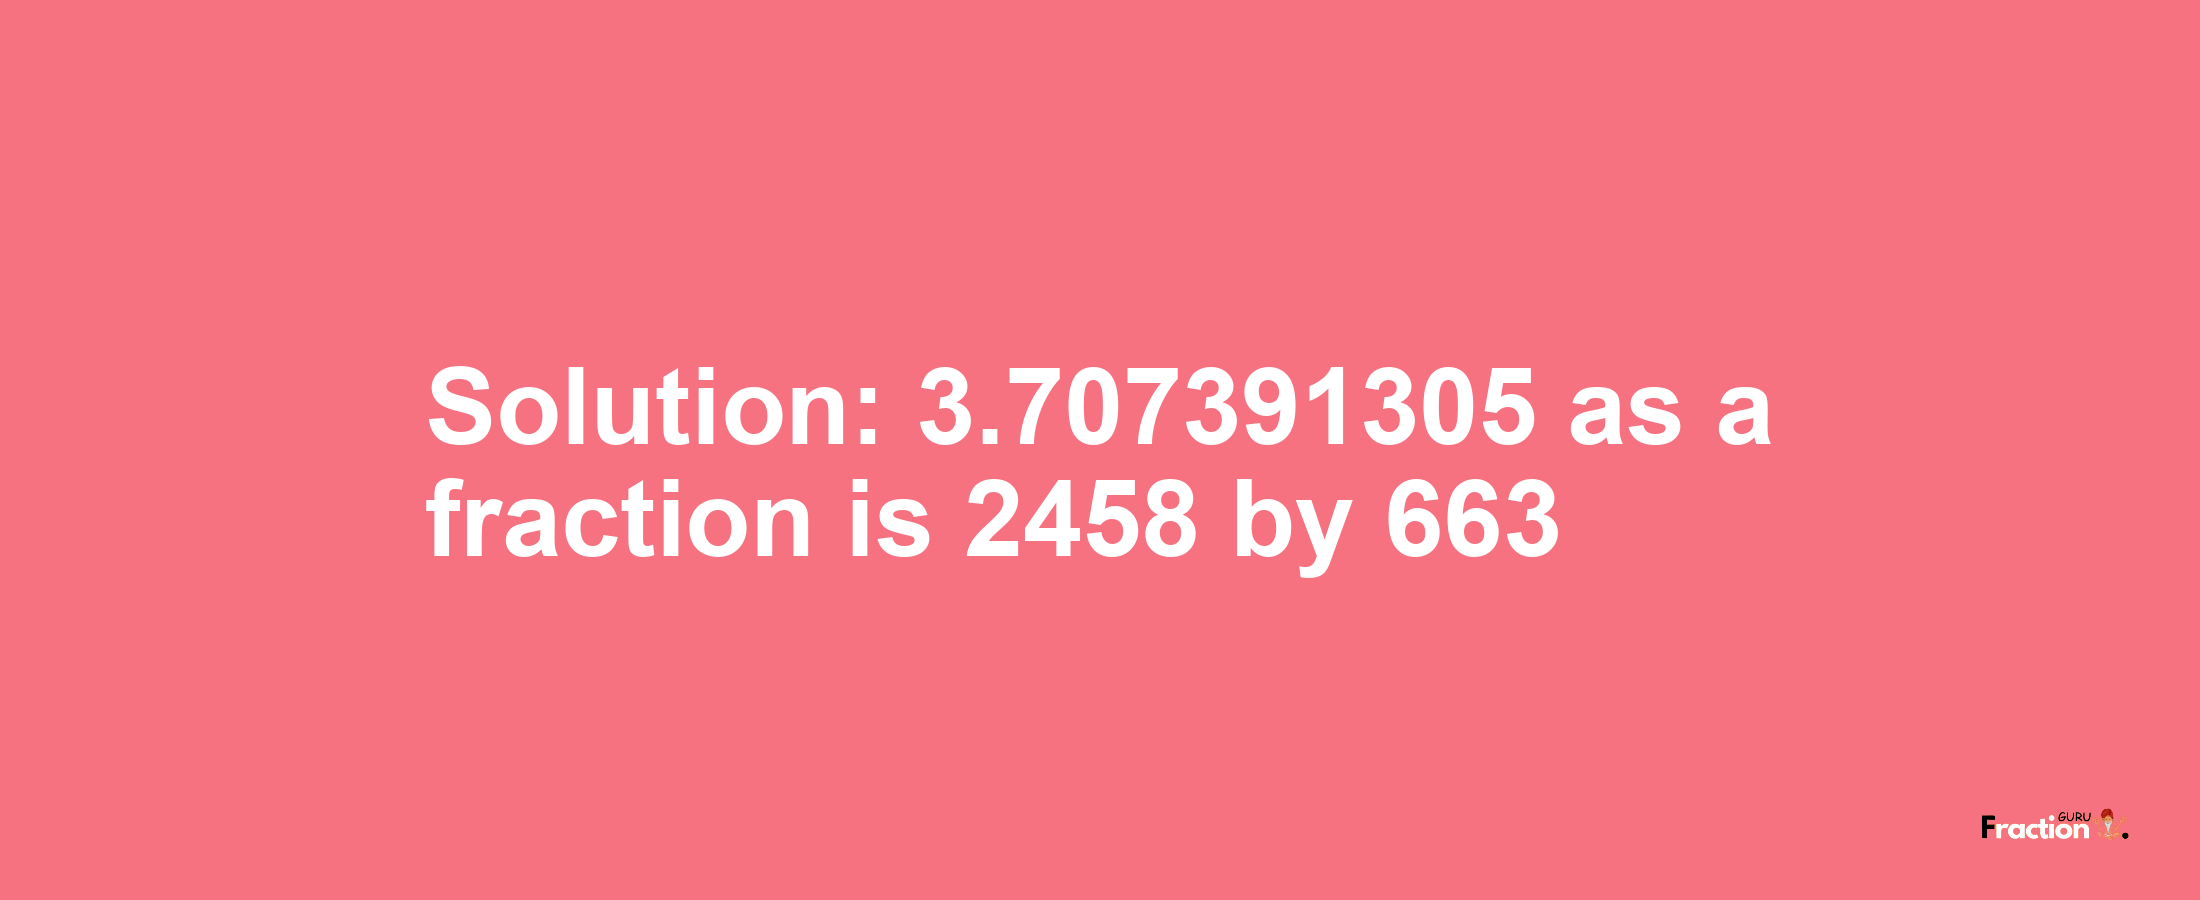 Solution:3.707391305 as a fraction is 2458/663